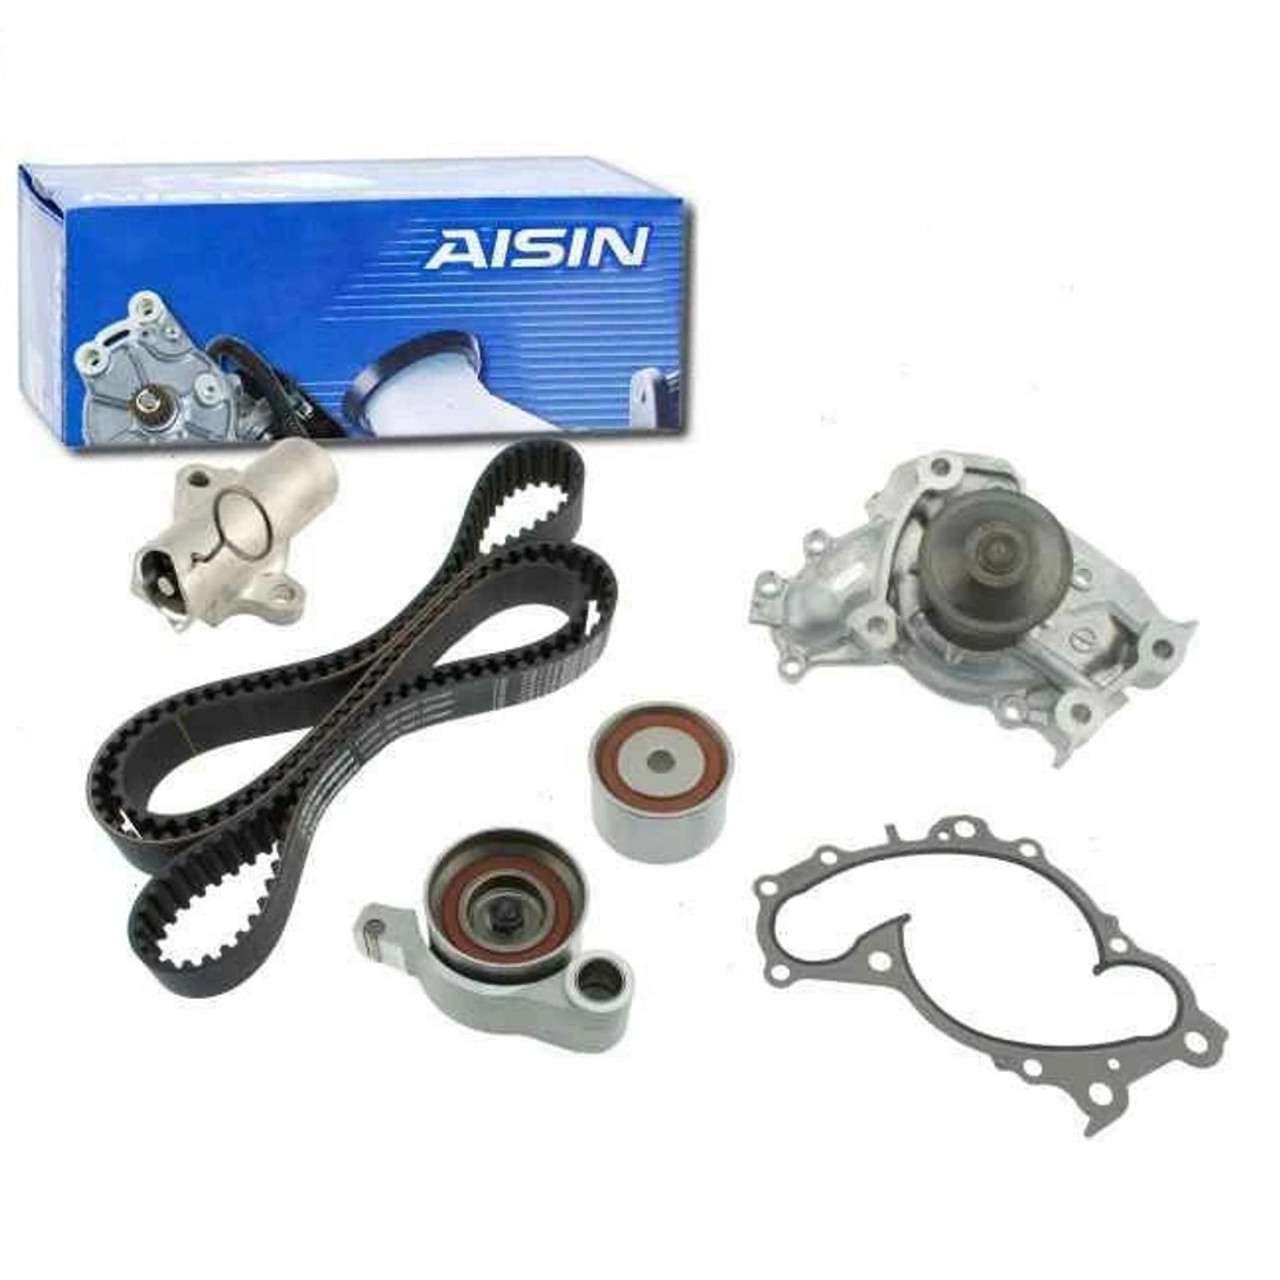 Timing Kit- Toyota 1MZFE & 3.3L 3MZFE Aisin Engine Timing Belt Kit with Water Pump & Hydraulic Tensioner (2001-2010) TKT-026